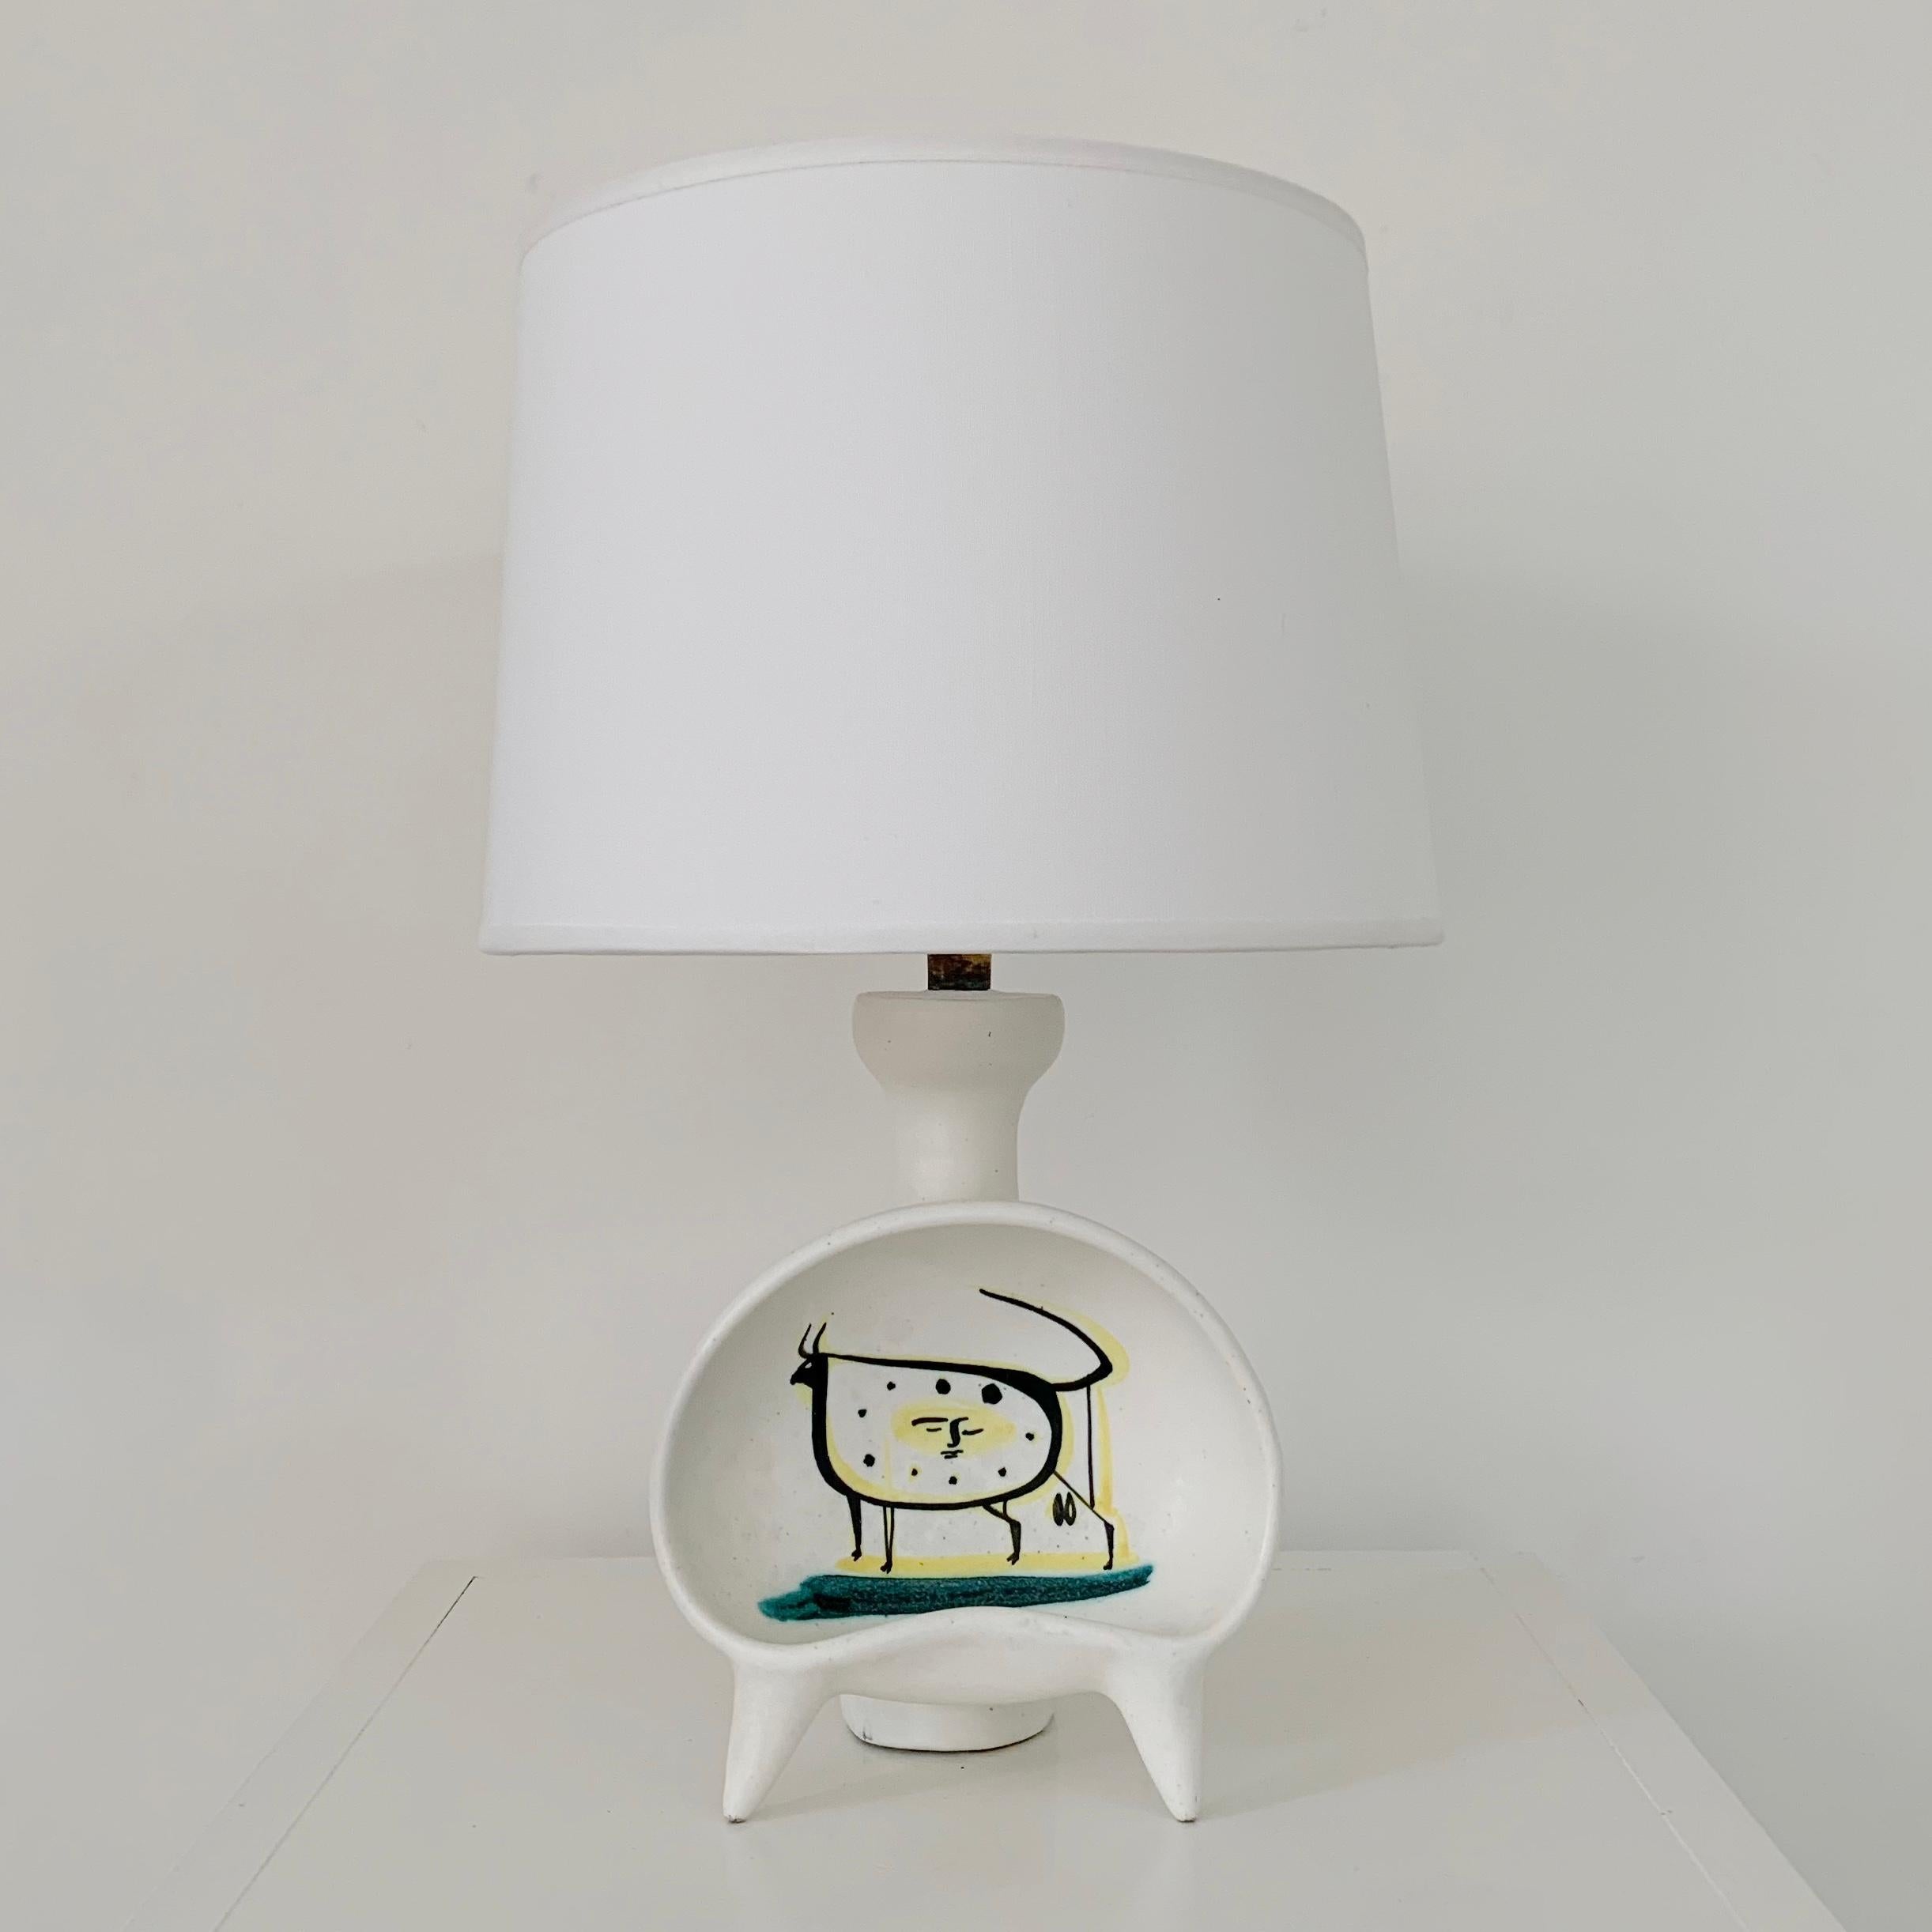 Nice Roger Capron table lamp, circa 1955, France.
White enameled ceramic, bull and sun poetic hand-painted decor.
Signed Capron Vallauris.
New fabric shade.
One E27 bulb .
Dimensions: 32 cm total height, diameter of the shade: 21 cm.
All purchases